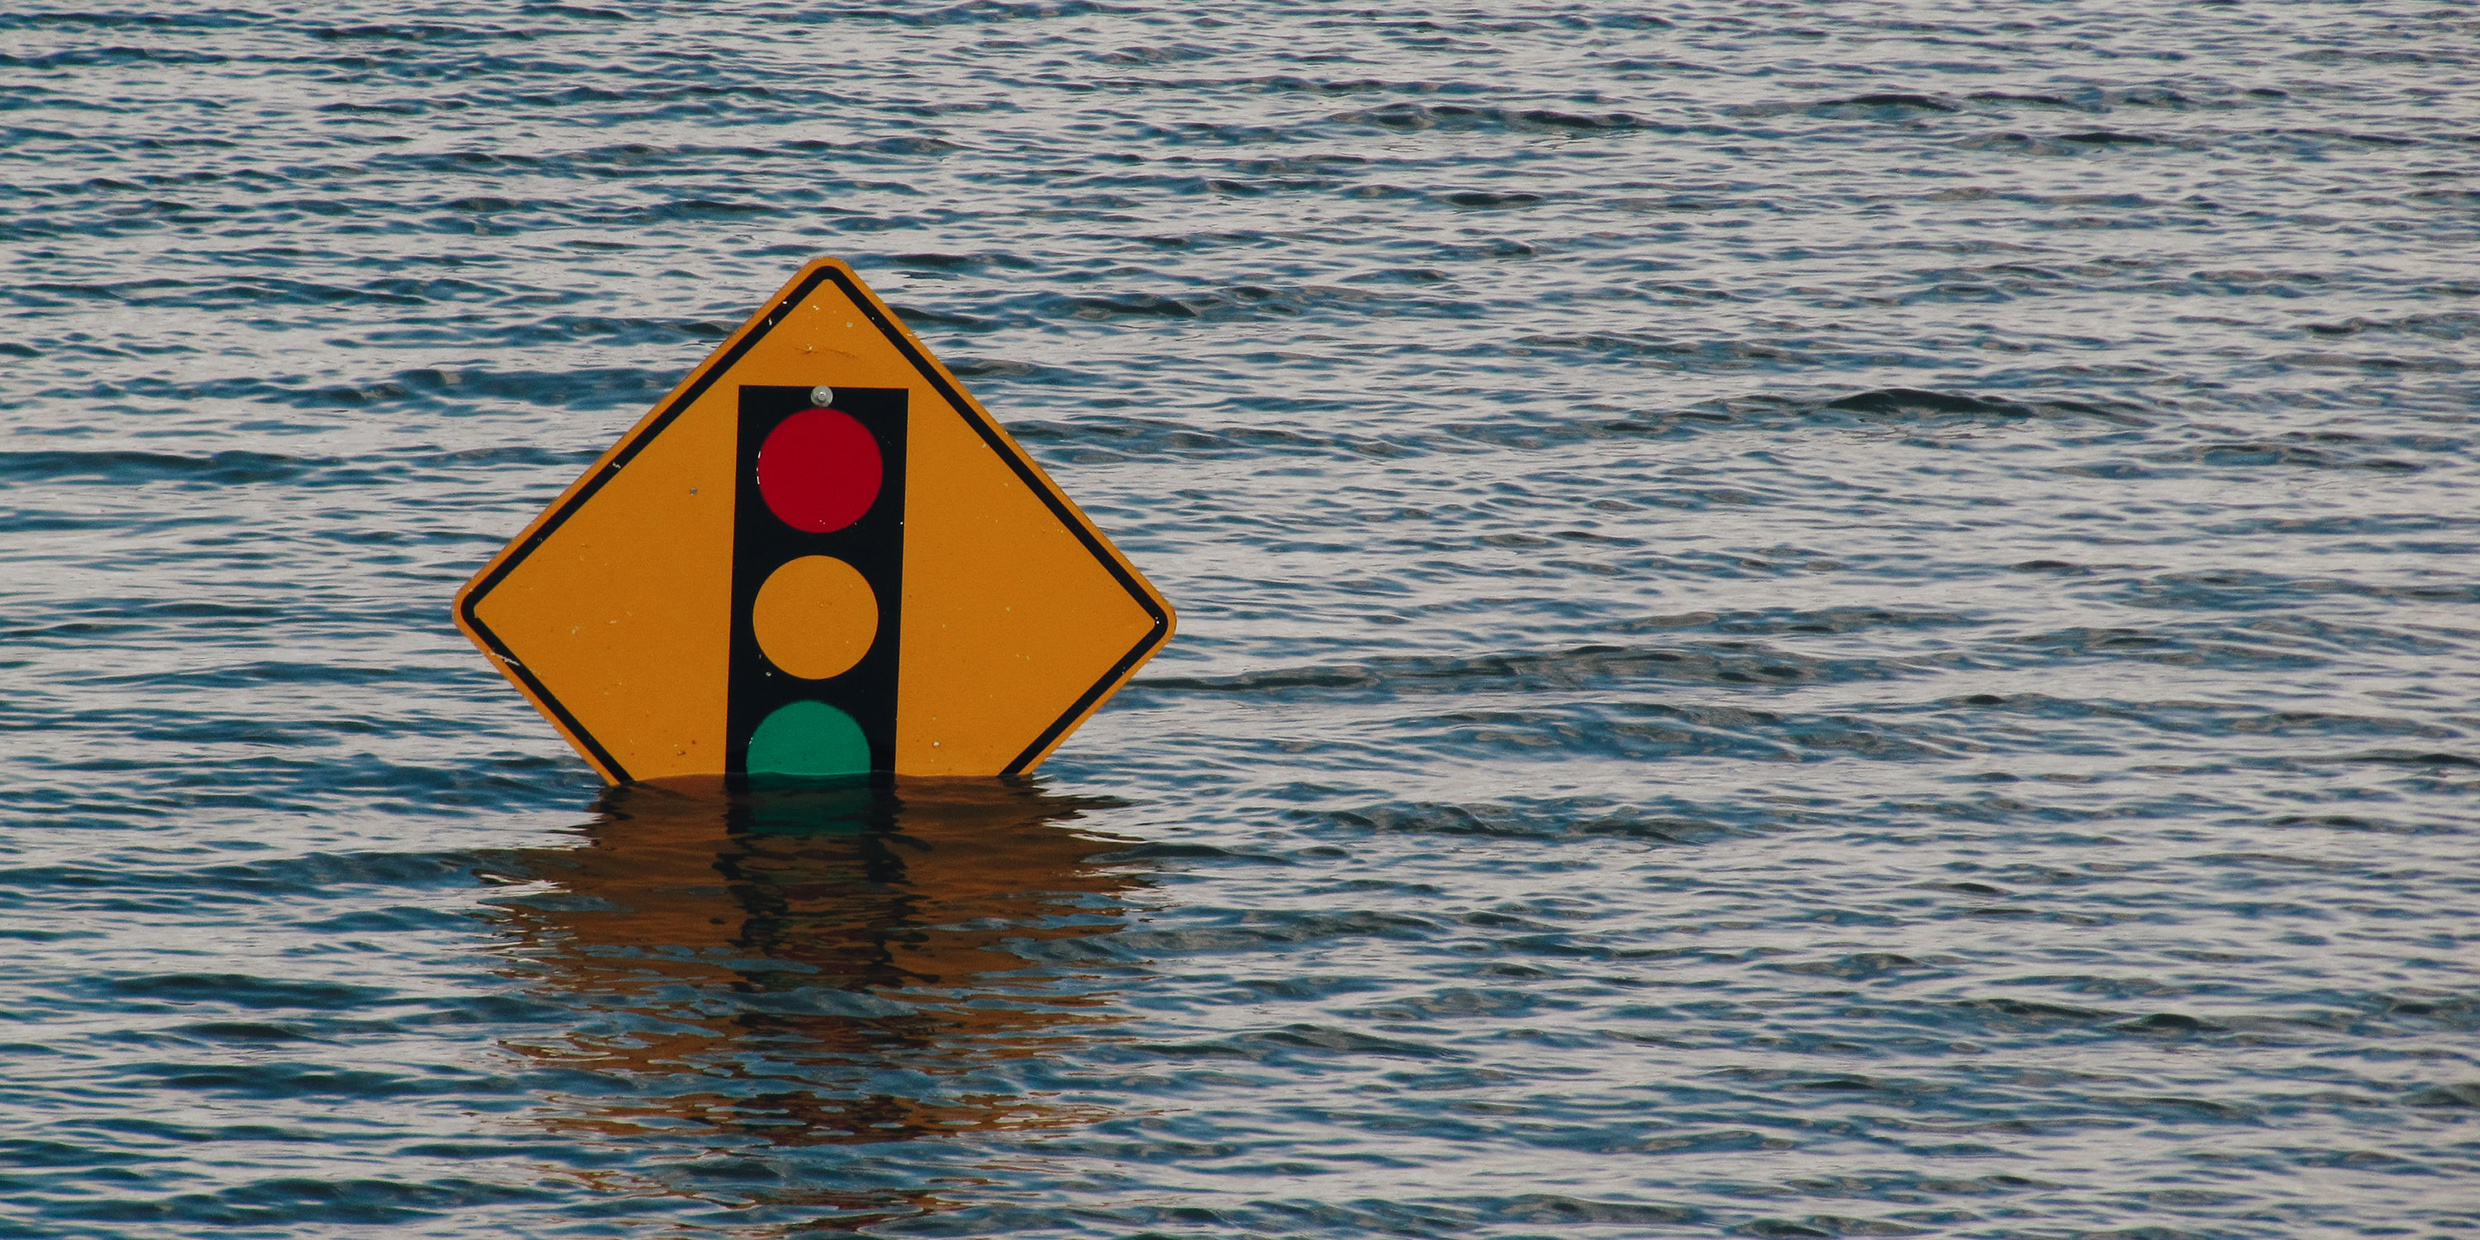 Image of traffic sign partially submerged by floodwater